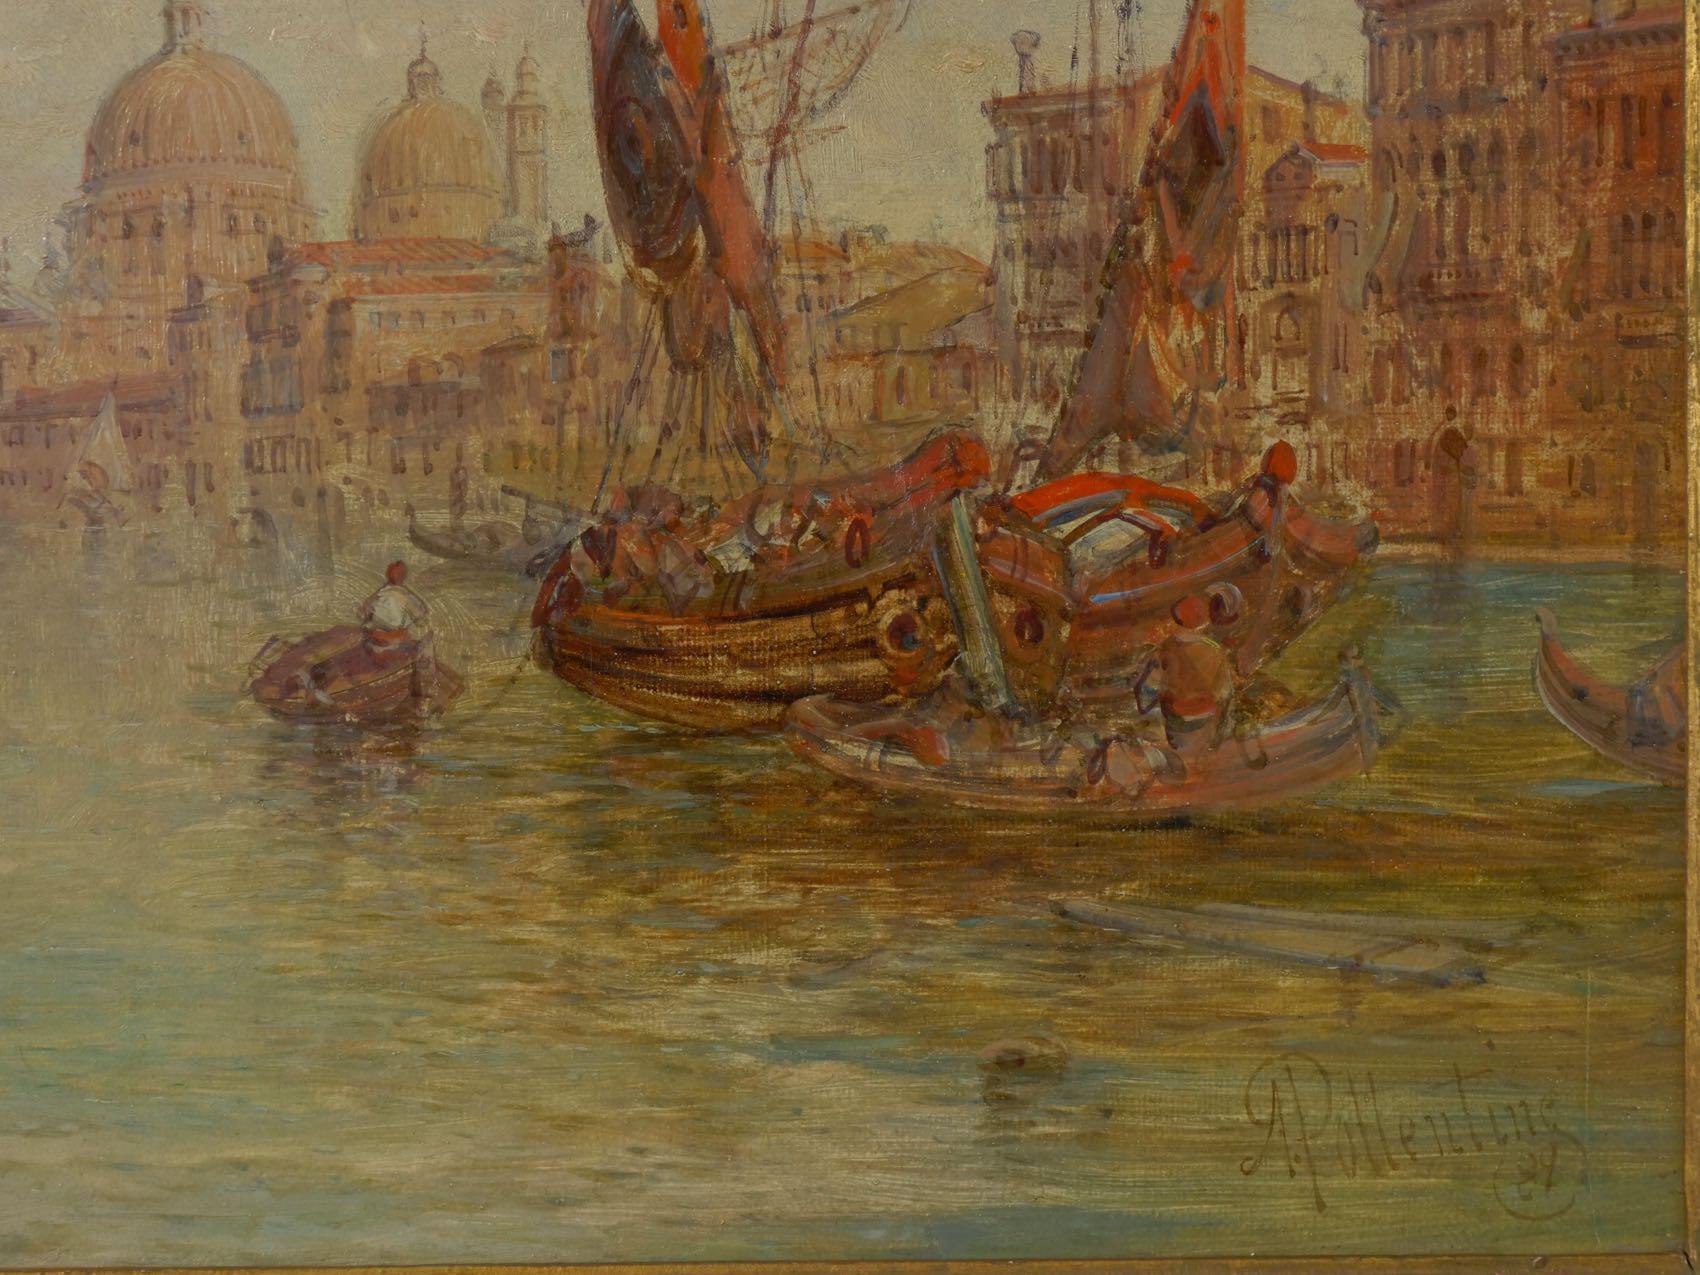 English Antique Oil Painting “Grand Canal, Venice” 1889 by Alfred Pollentine